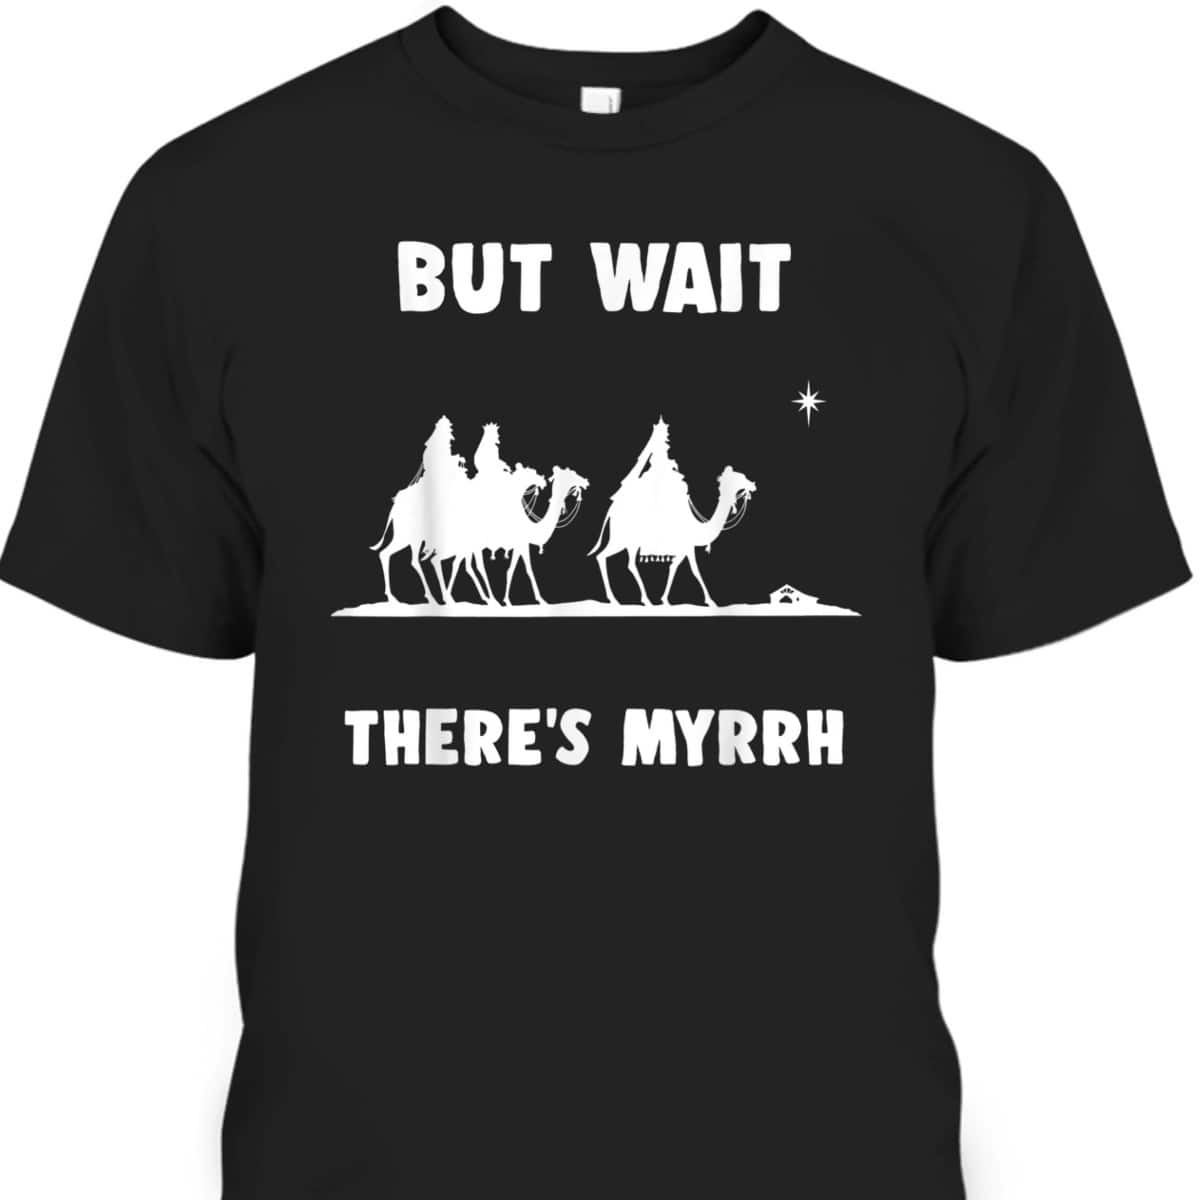 Funny Christian But Wait There's Myrrh Quote T-Shirt